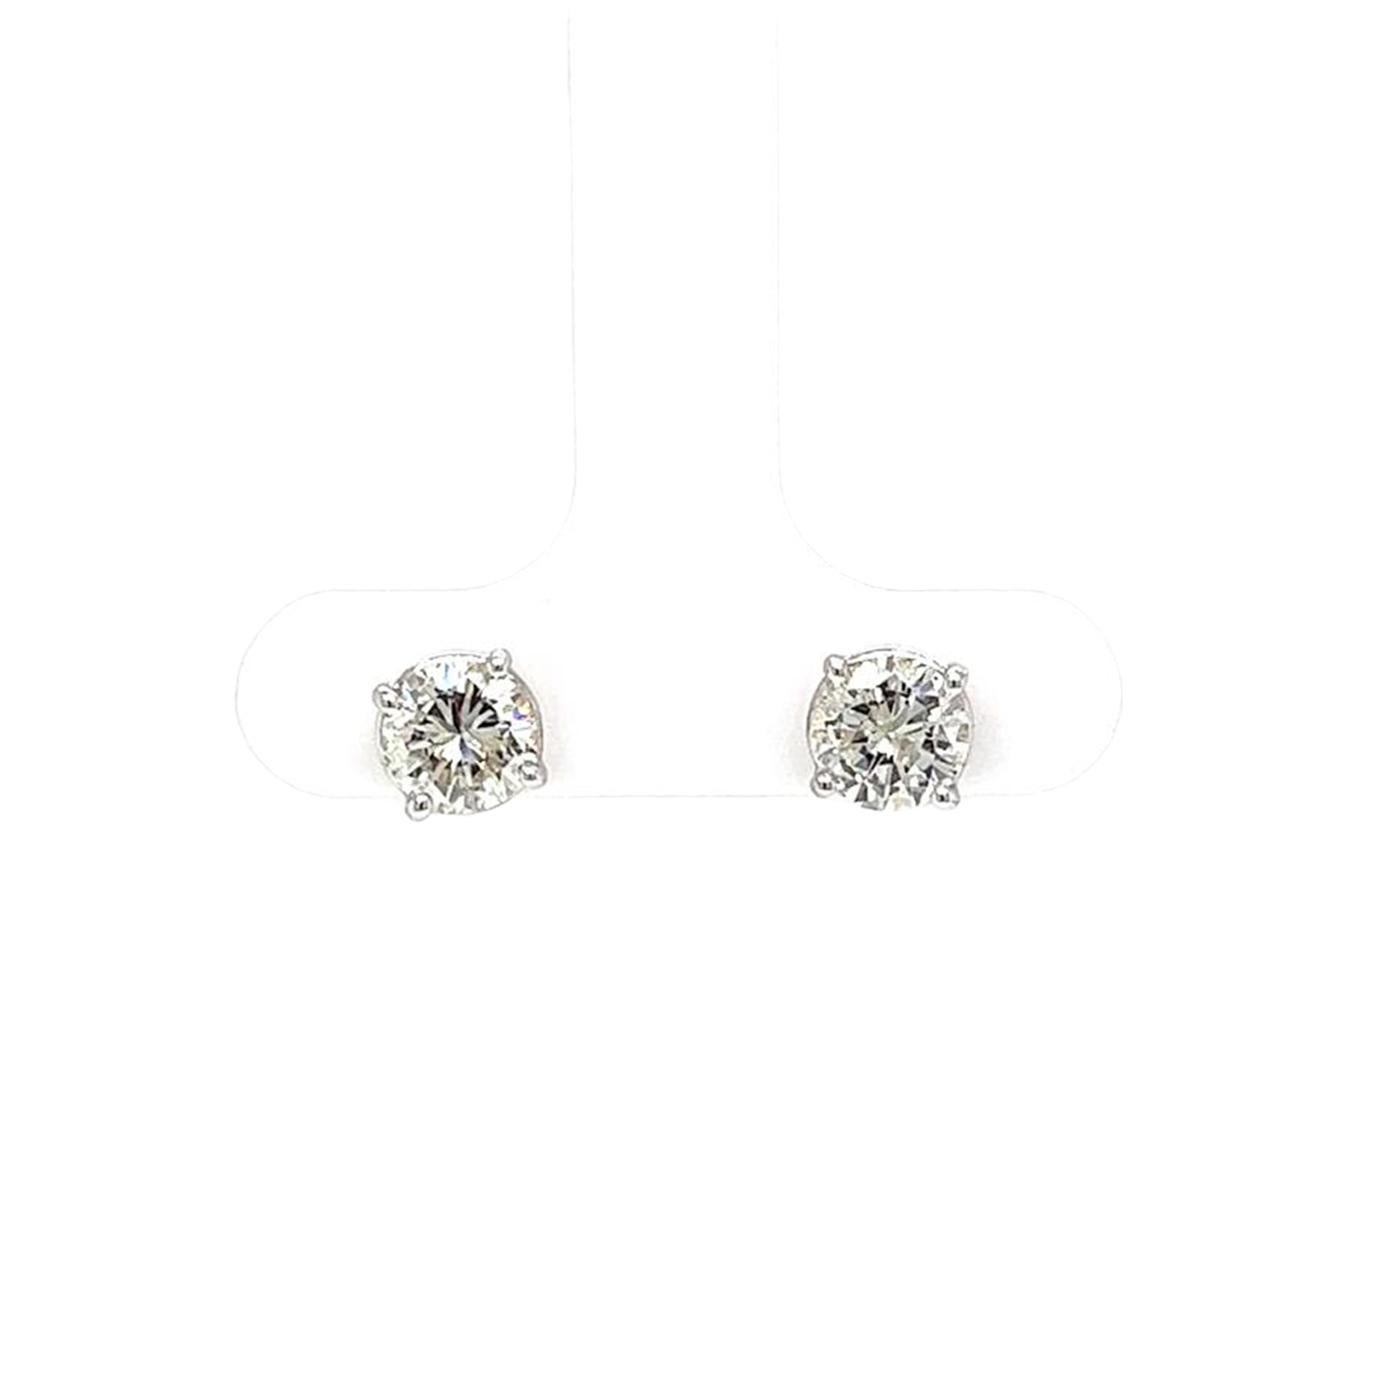 Round Cut 1.55ct Natural Round Diamond Stud Earrings 4-Prong Basket Setting 14K White Gold For Sale